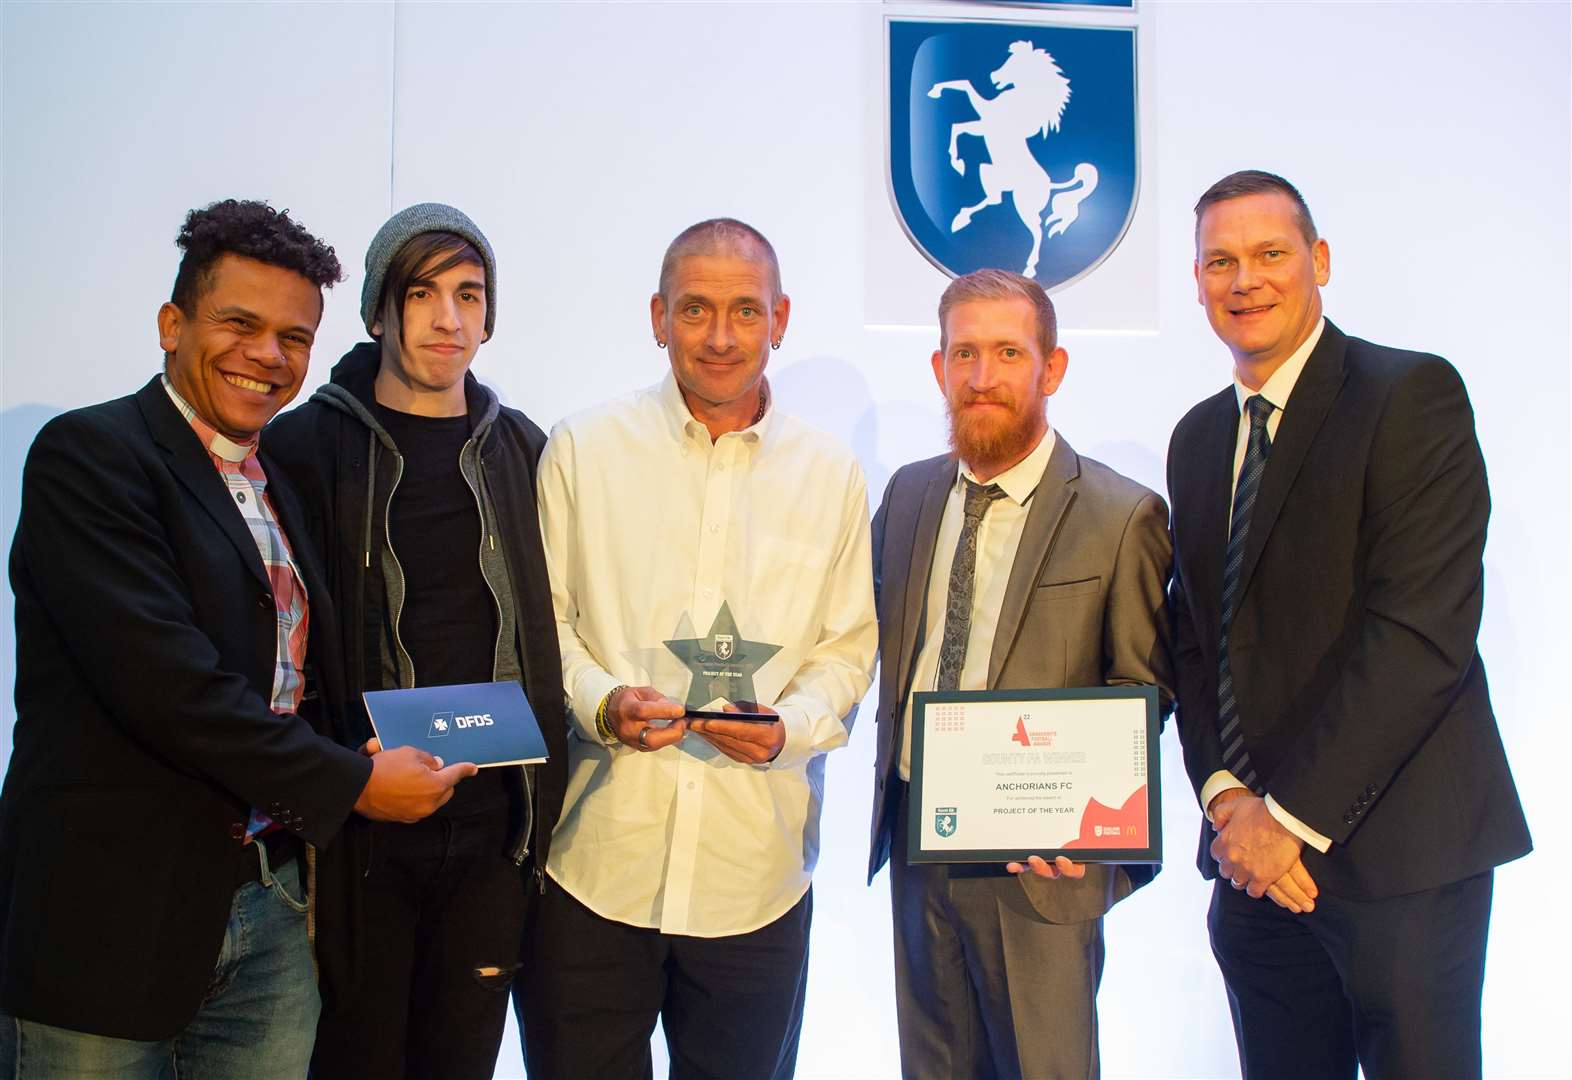 Anchorians, Grassroots Project of the Year. Picture: Kent FA